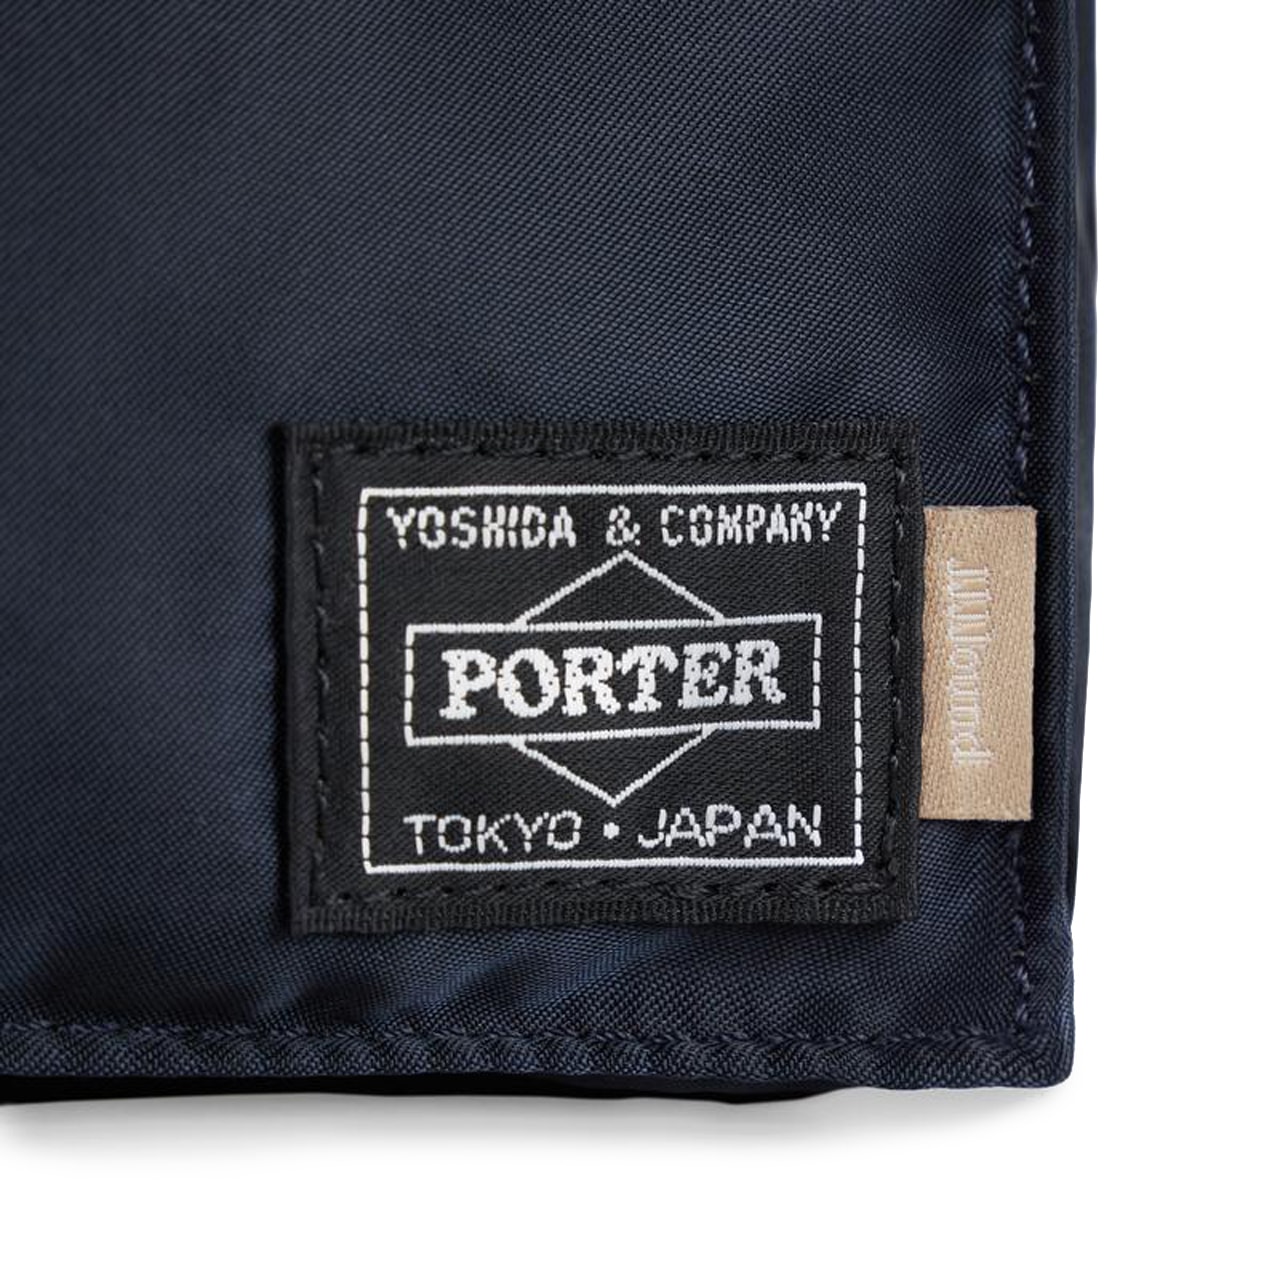 JJJJound x PORTER Yoshida Kaban 85th Anniversary Collaboration bag collection boston duffle tote shoulder briefcase pouch release date info buy february 11 price